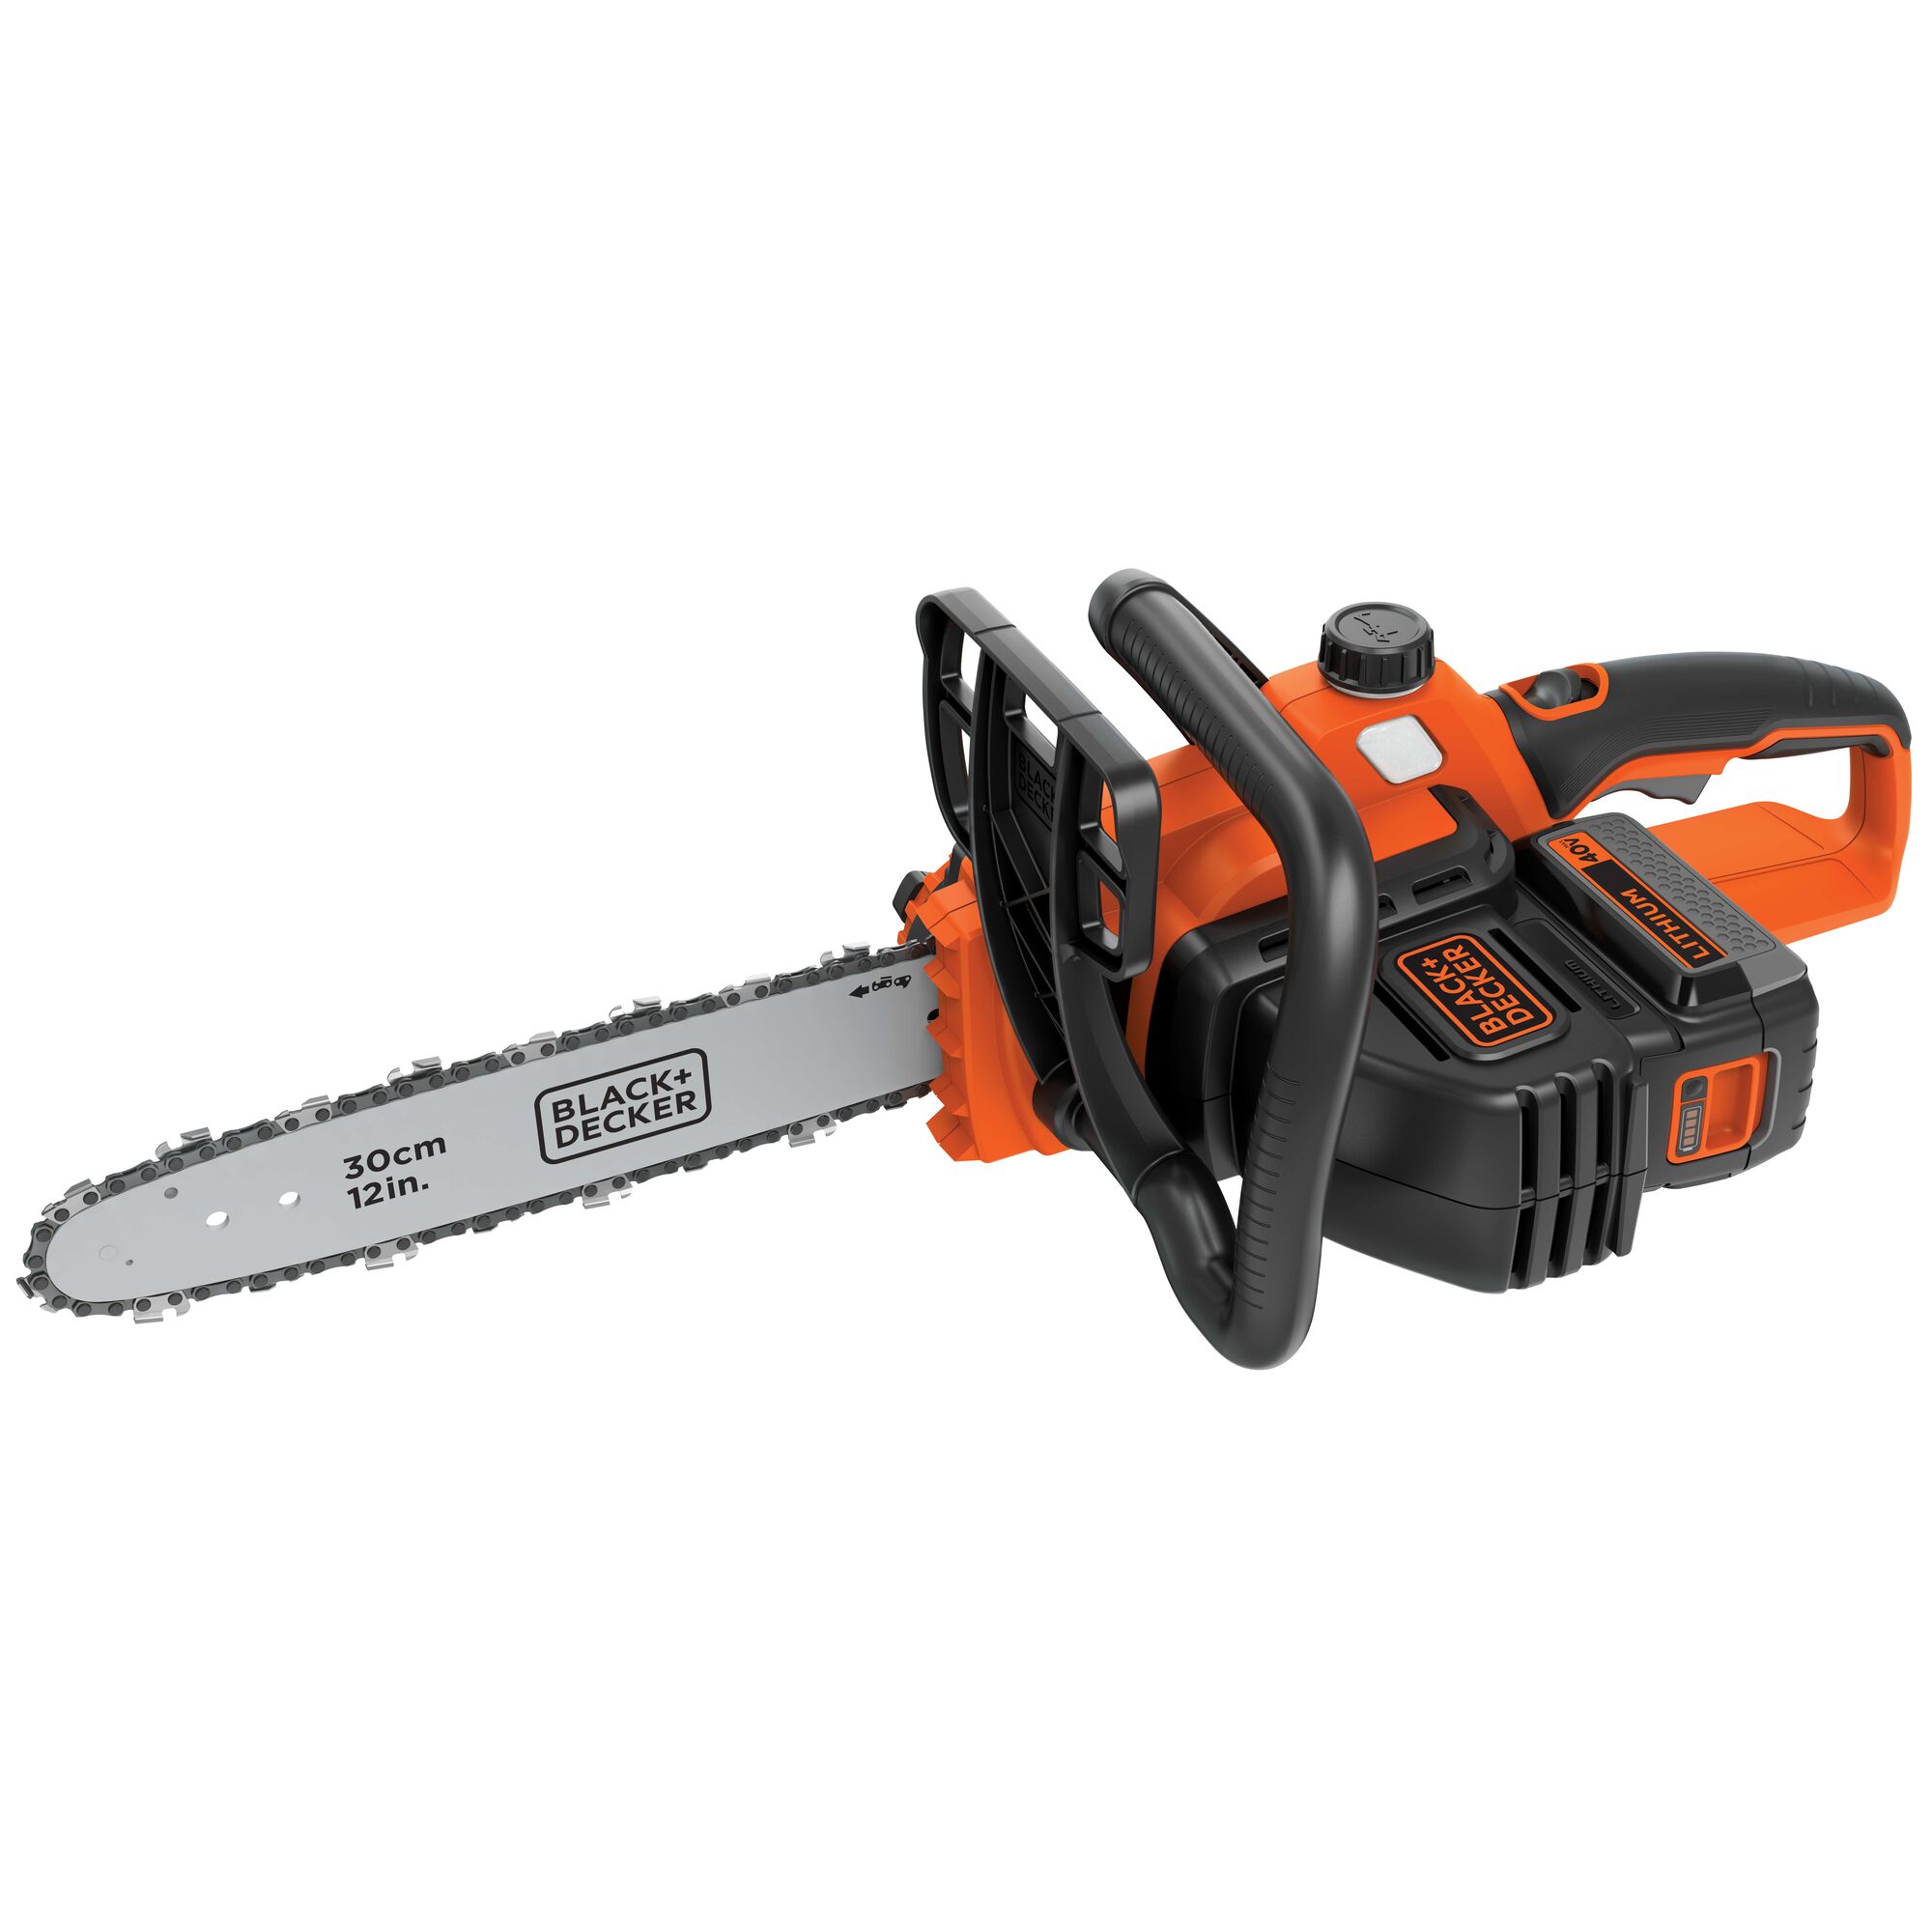 Profile of chainsaw